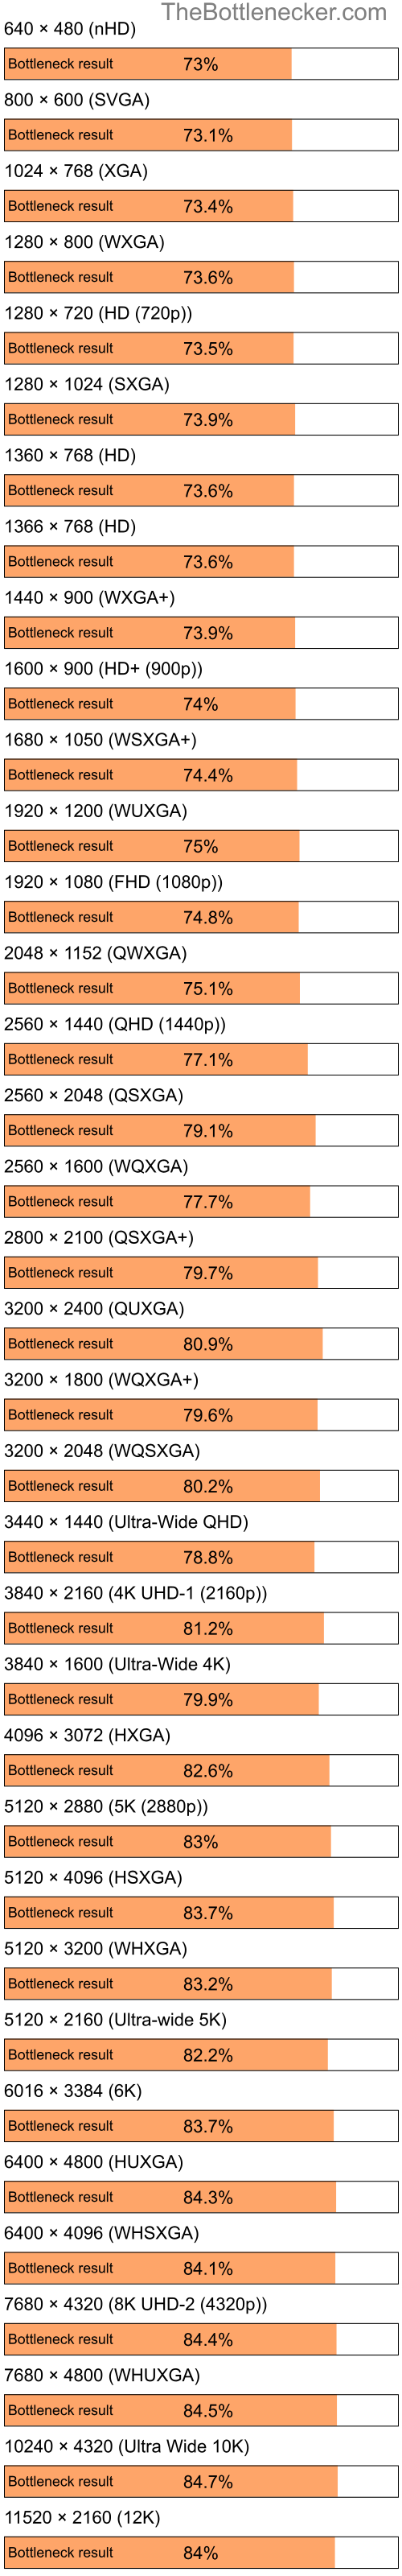 Bottleneck results by resolution for Intel Celeron and AMD Radeon HD 2350 in Graphic Card Intense Tasks